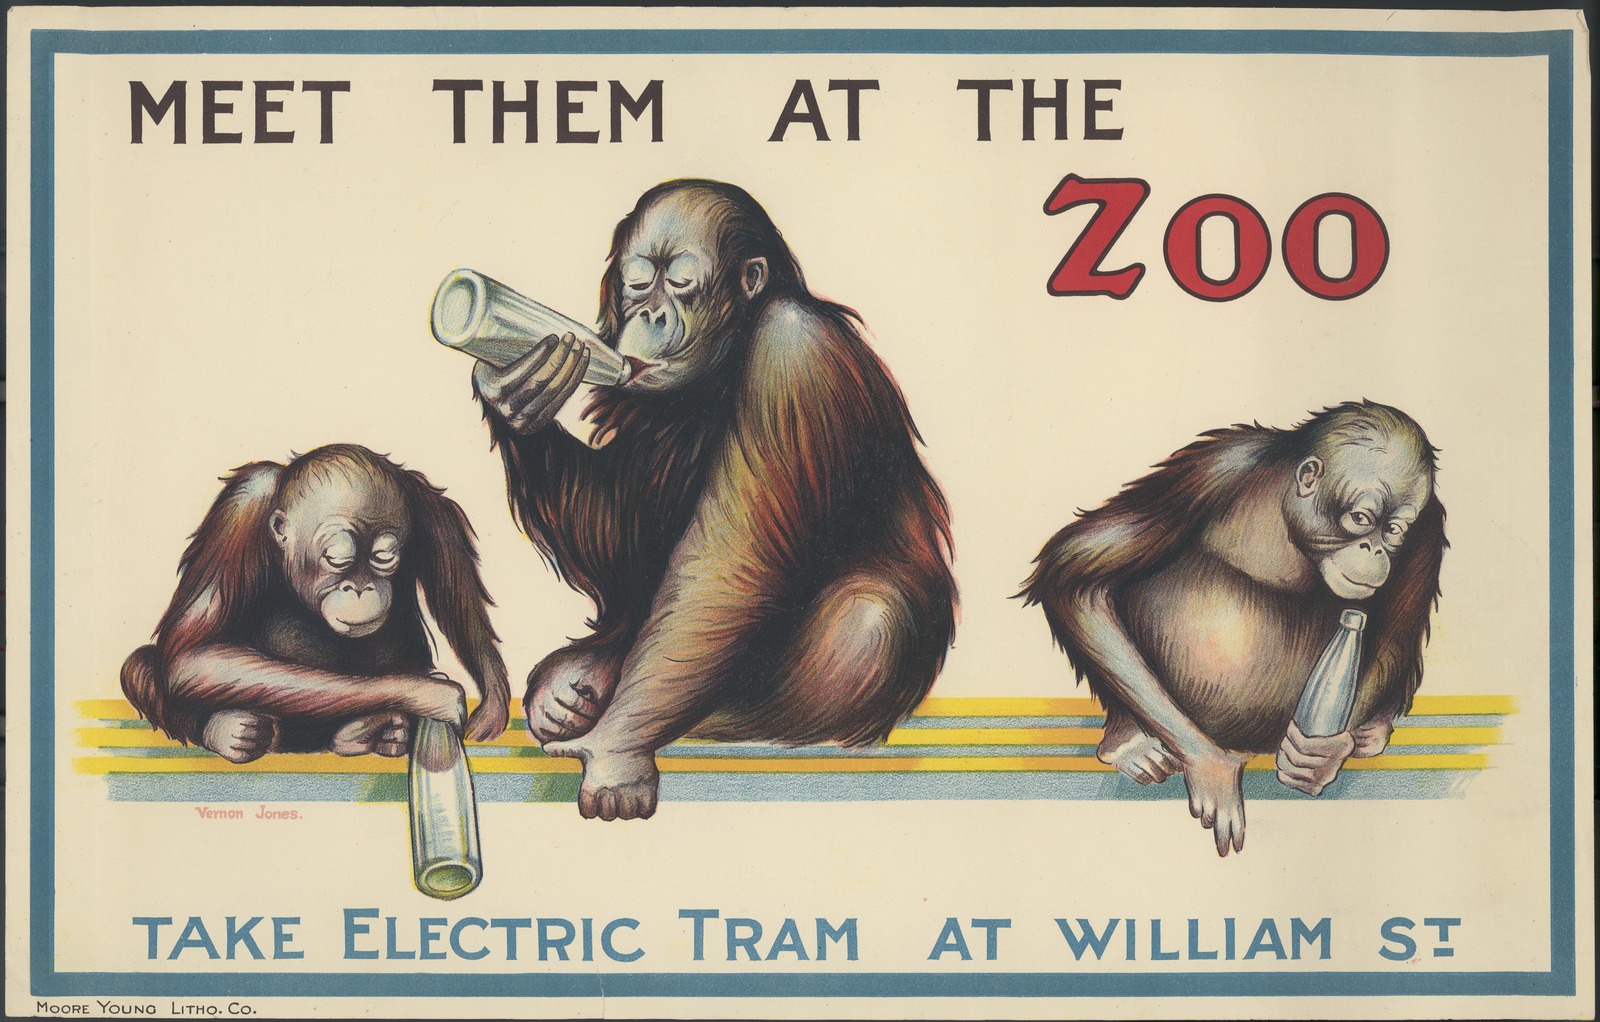 Shows three monkeys each with a baby's feeding bottle, title of poster printed above and below image